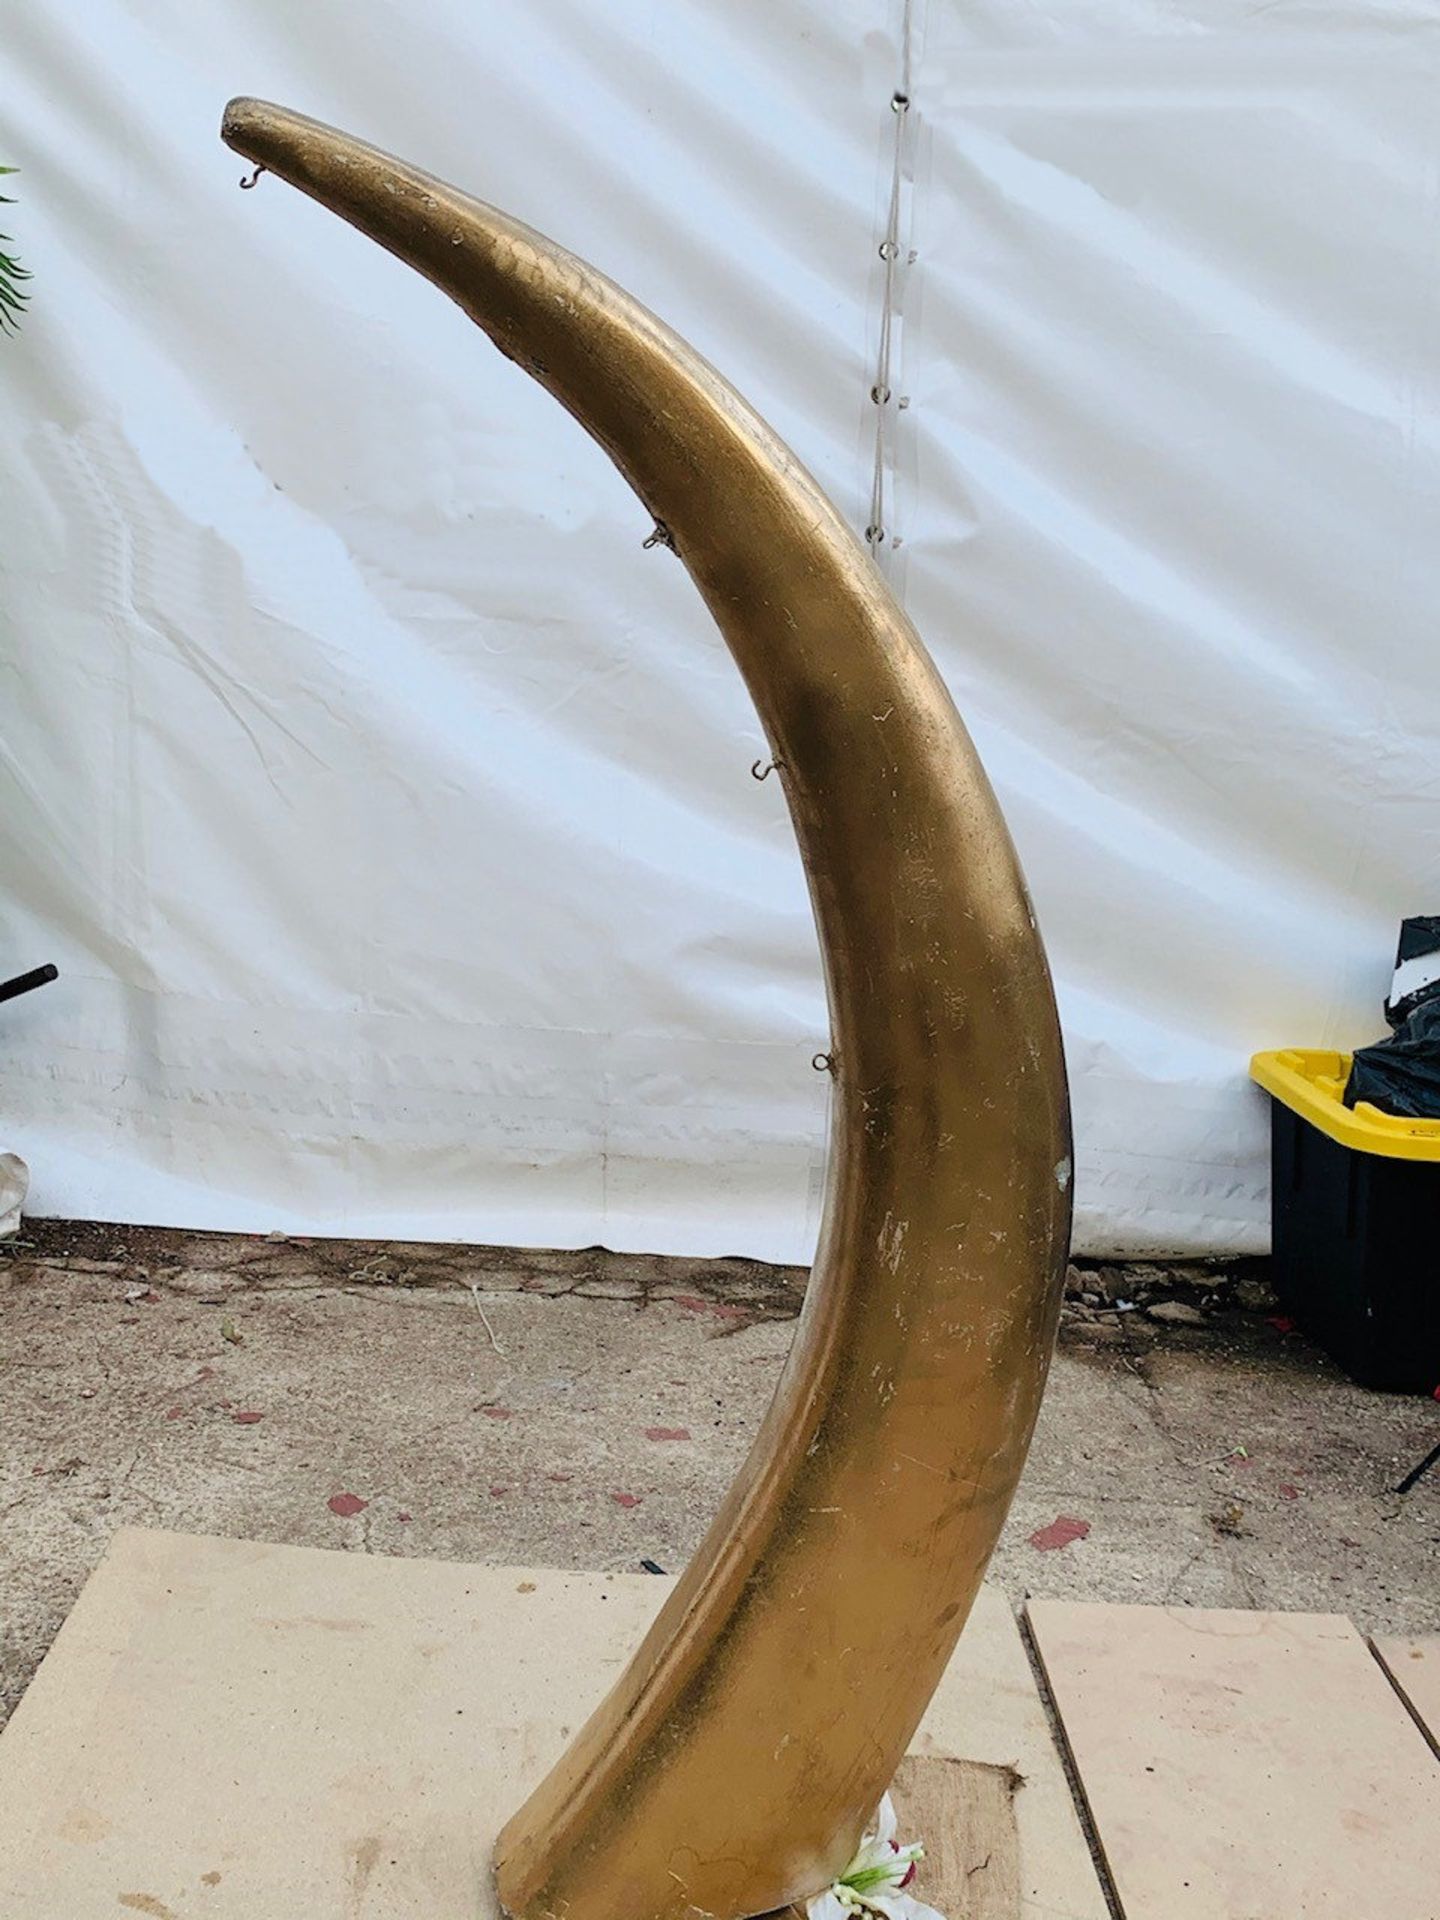 4 x Tusk Shaped 1.2 Metre Tall Fibre Glass Table Centre Pieces In Gold - Image 2 of 2